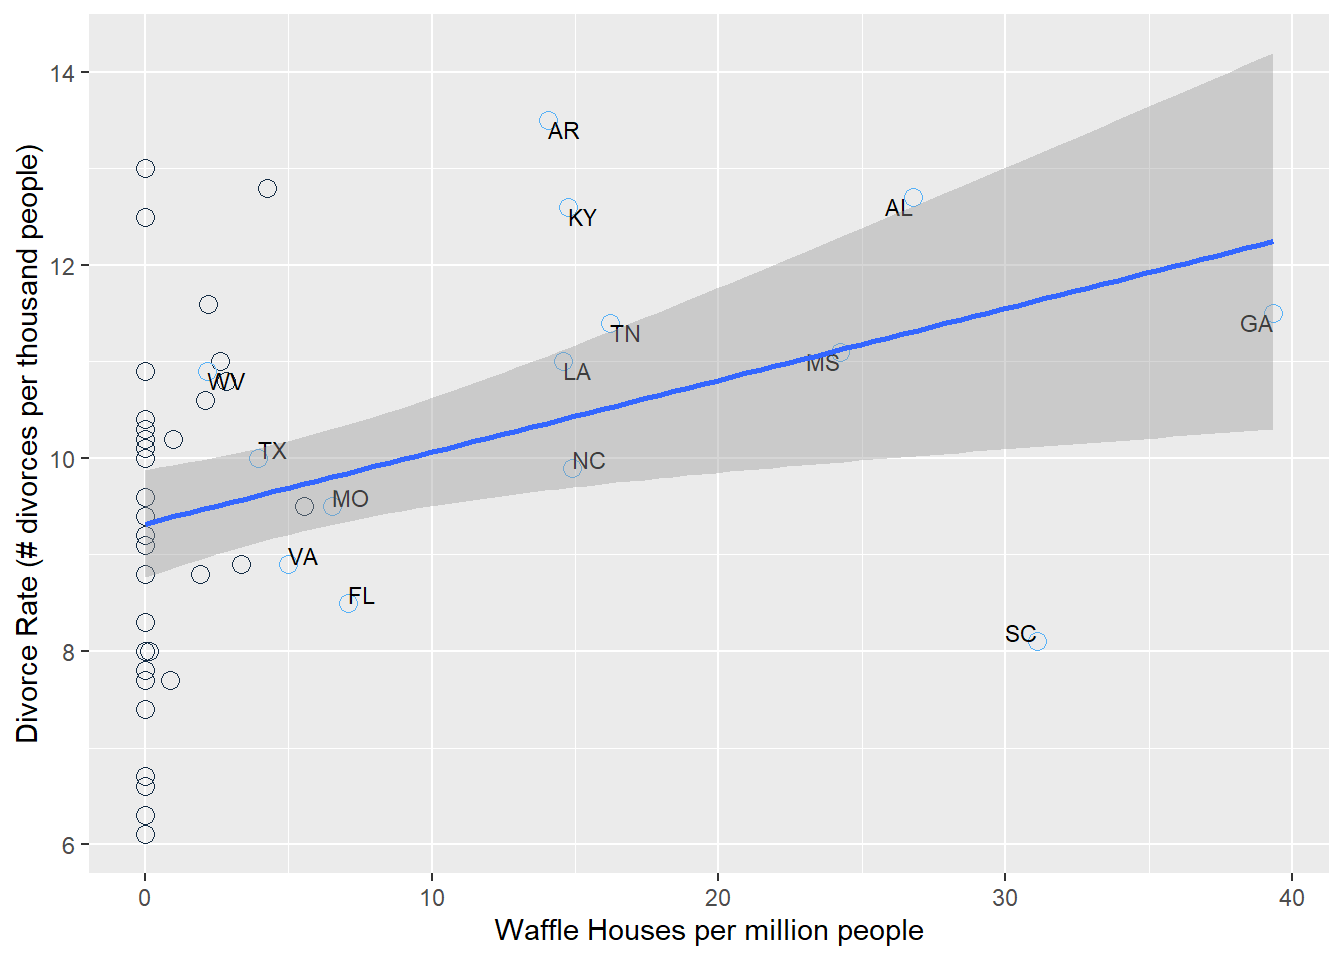 Divorce rate as a function of the number of Waffle House restaurants per million people in the United States. Each dot is a US state. Blue labeled dots represent states in the US South.